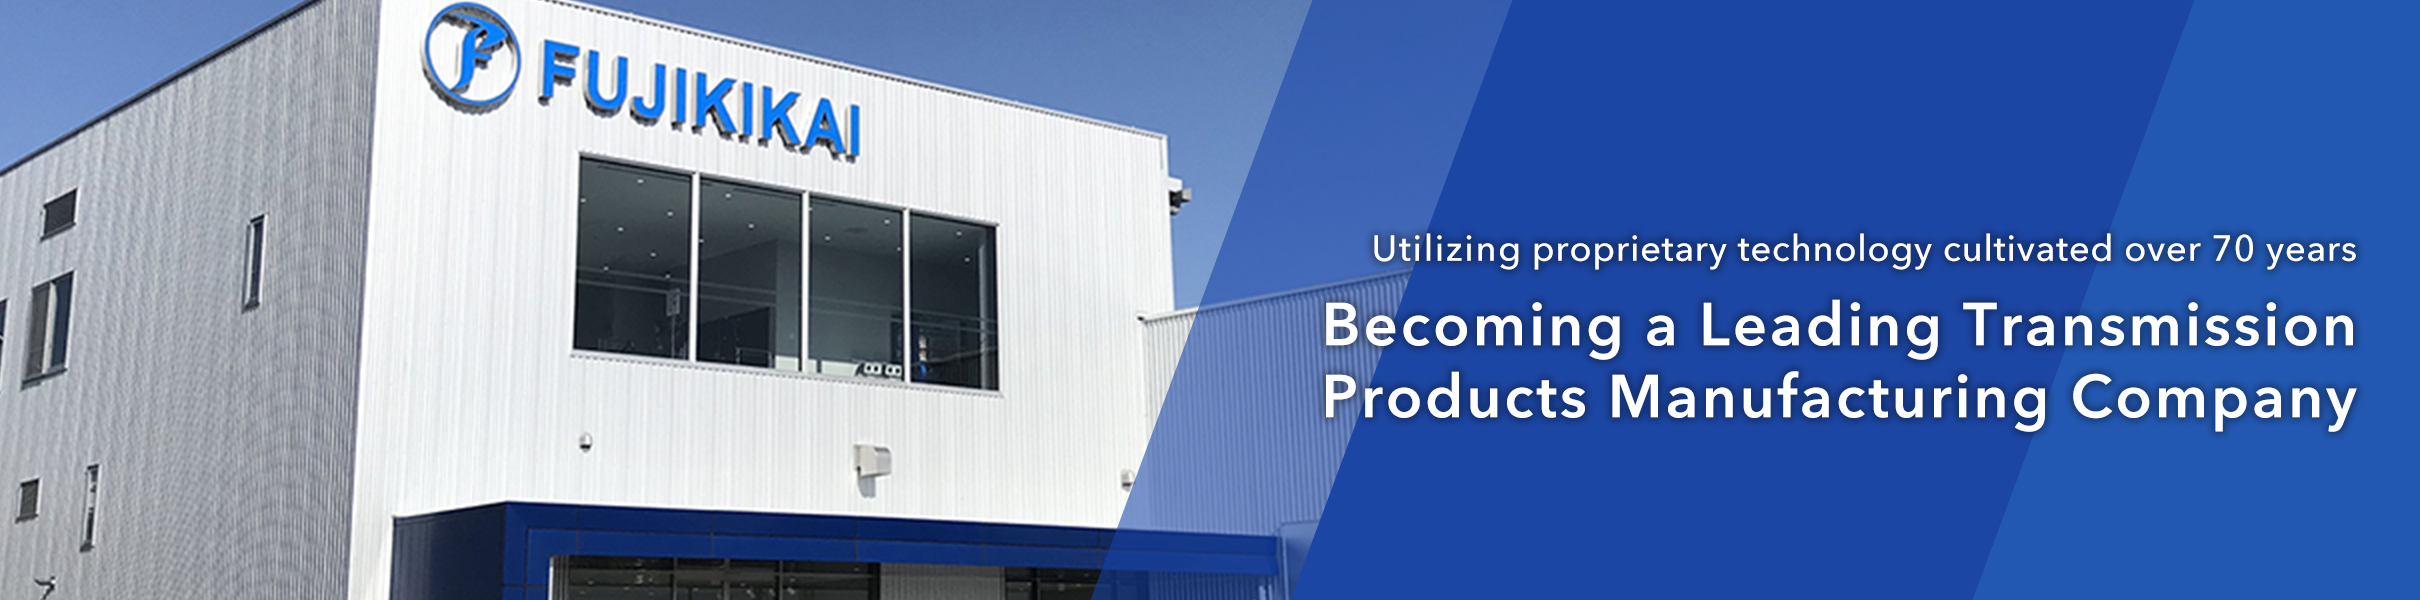 Becoming a Leading Transmission Products Manufacturing Company